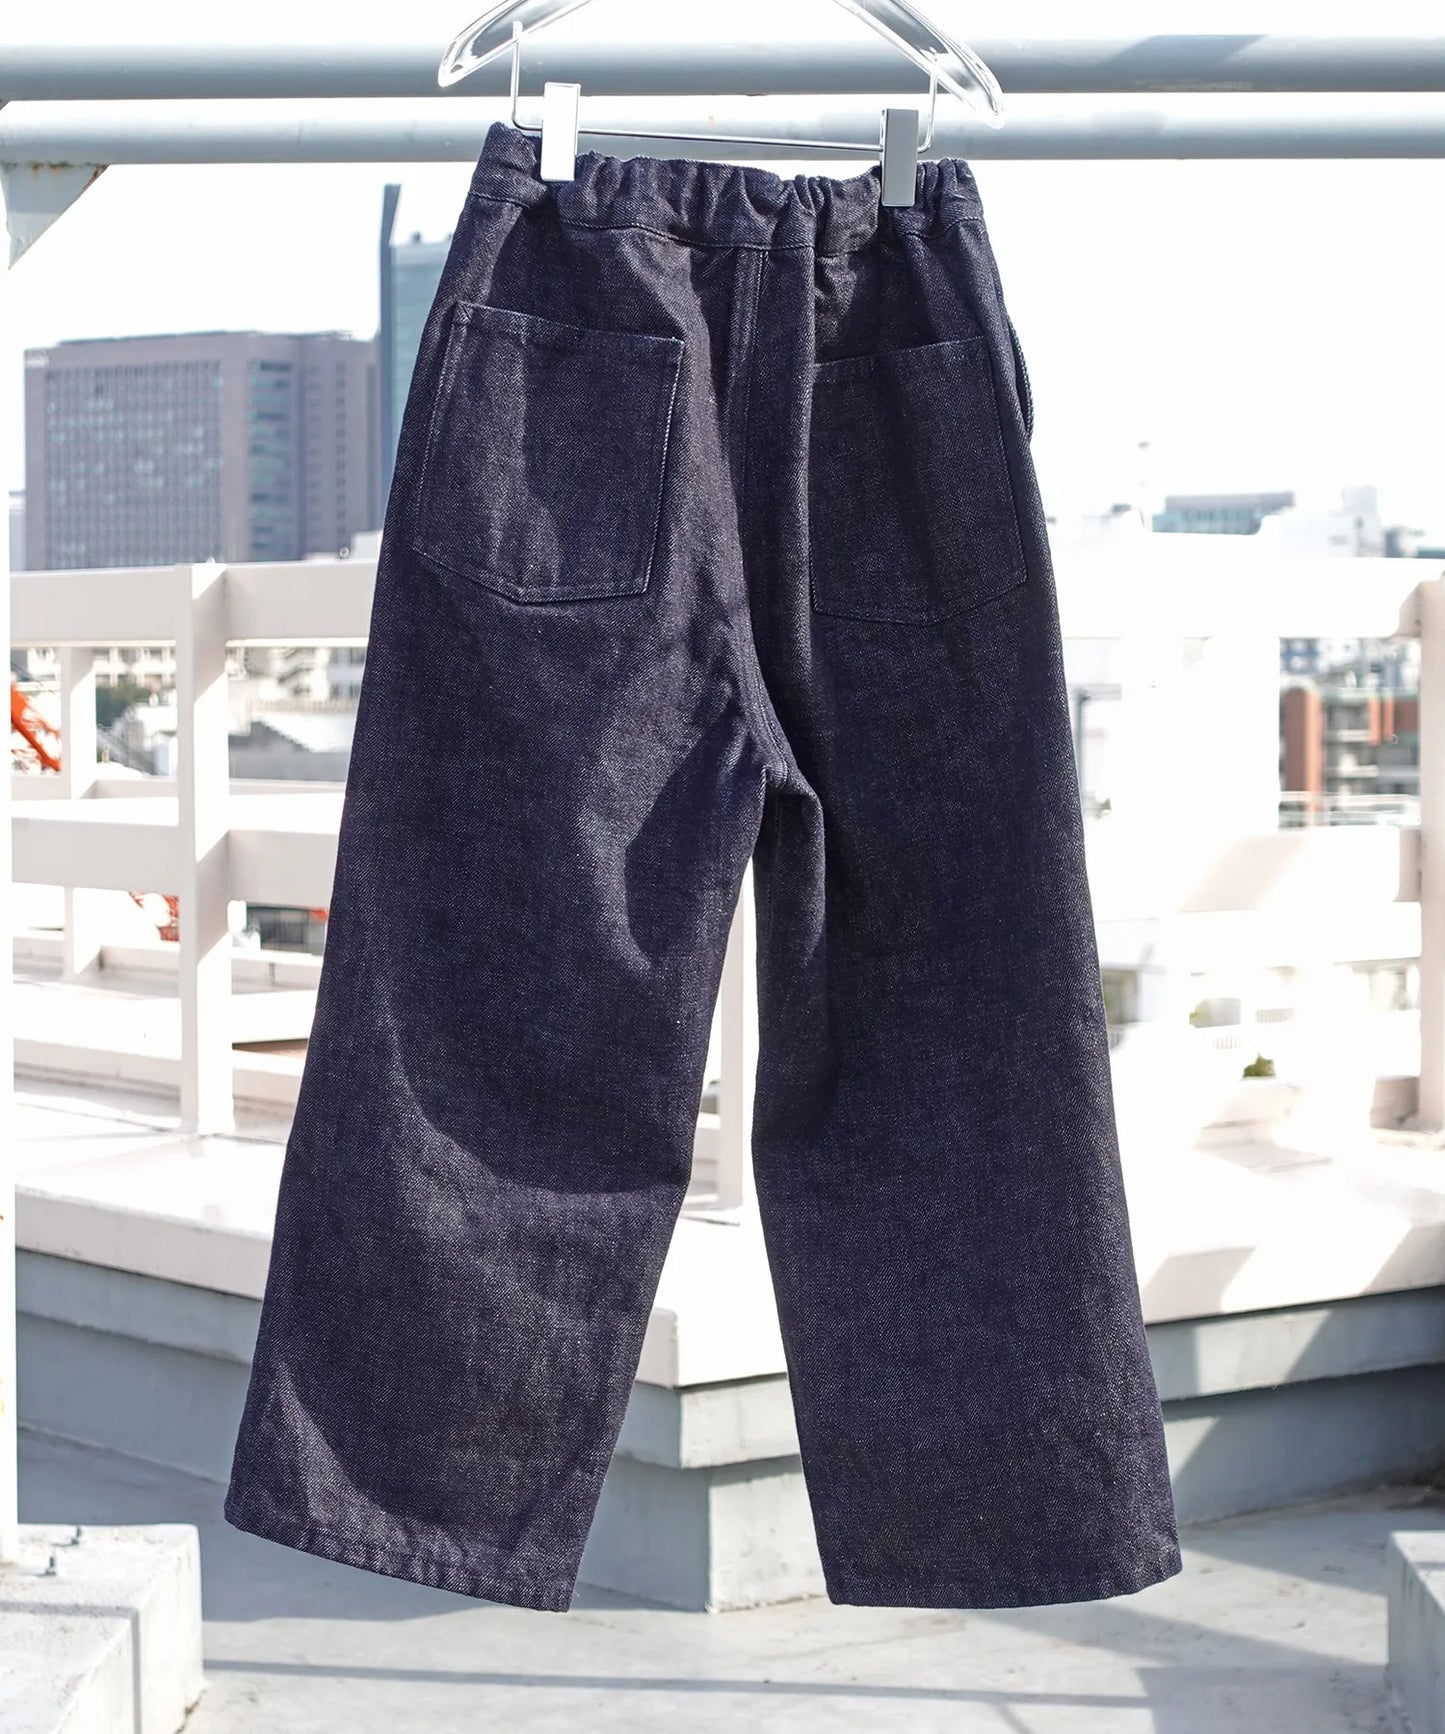 [Environmentally friendly material] Re DENIM PAINTER PANTS Recycled cotton denim Year-round material [100-145cm]